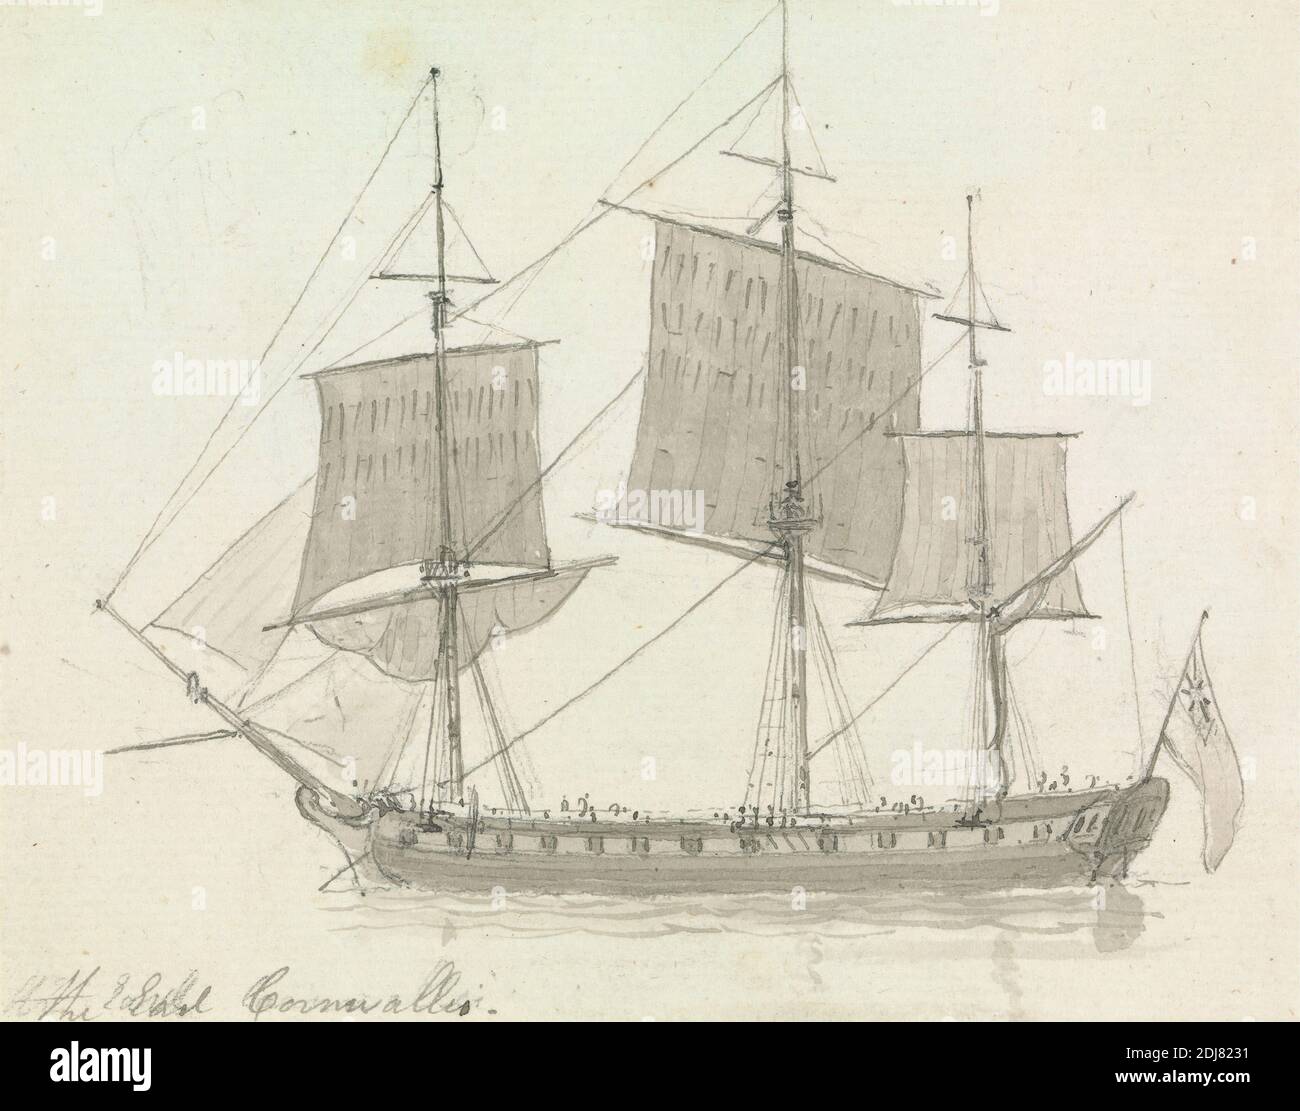 Ship, 'The Earl Cornwallis', Thomas Daniell, 1749–1840, British, active in India, ca. 1790, Gray ink and gray wash over graphite on medium, smooth, cream laid paper, Sheet: 4 3/8 x 5 1/2 inches (11.1 x 14 cm), flag, marine art, sails, ship Stock Photo